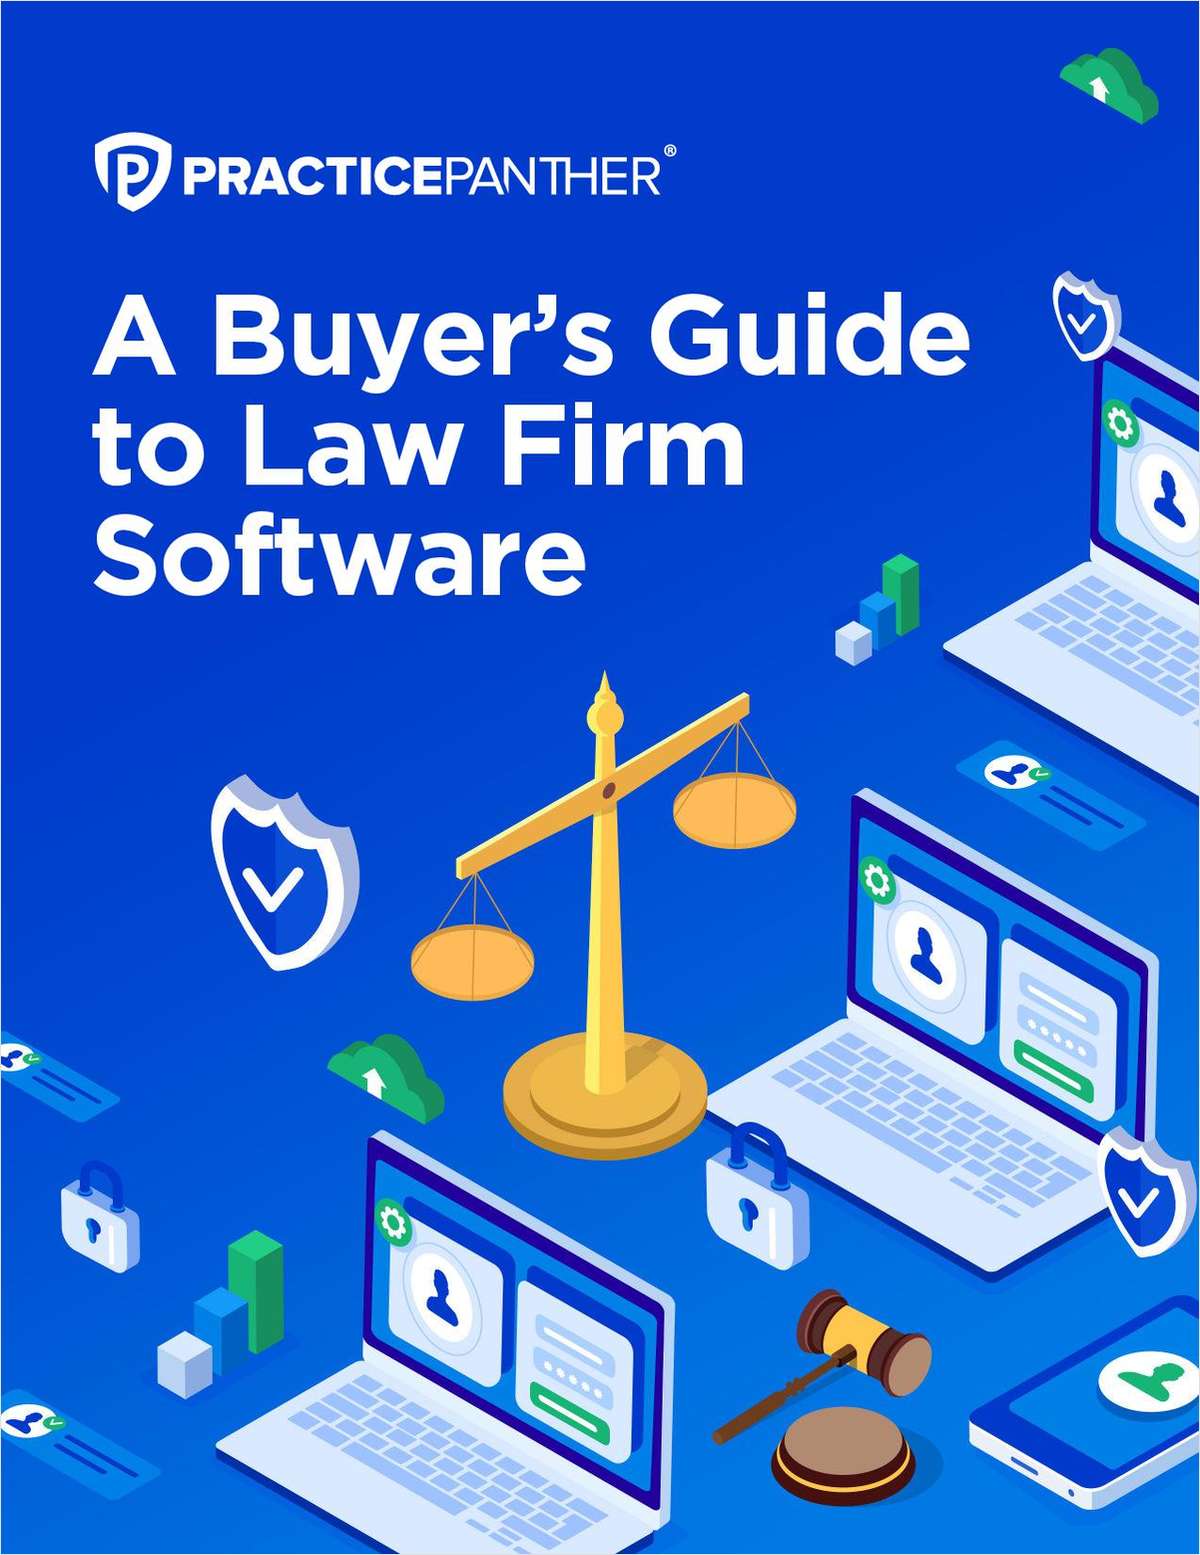 Discover how law firm software can revolutionize your practice! Whether your firm is new to law firm software or looking to upgrade its existing software, choosing the right solution for your firm can be overwhelming. Download this comprehensive guide today and gain a better understanding of the different types of law firm software available and what features are best to look for to benefit your firm.